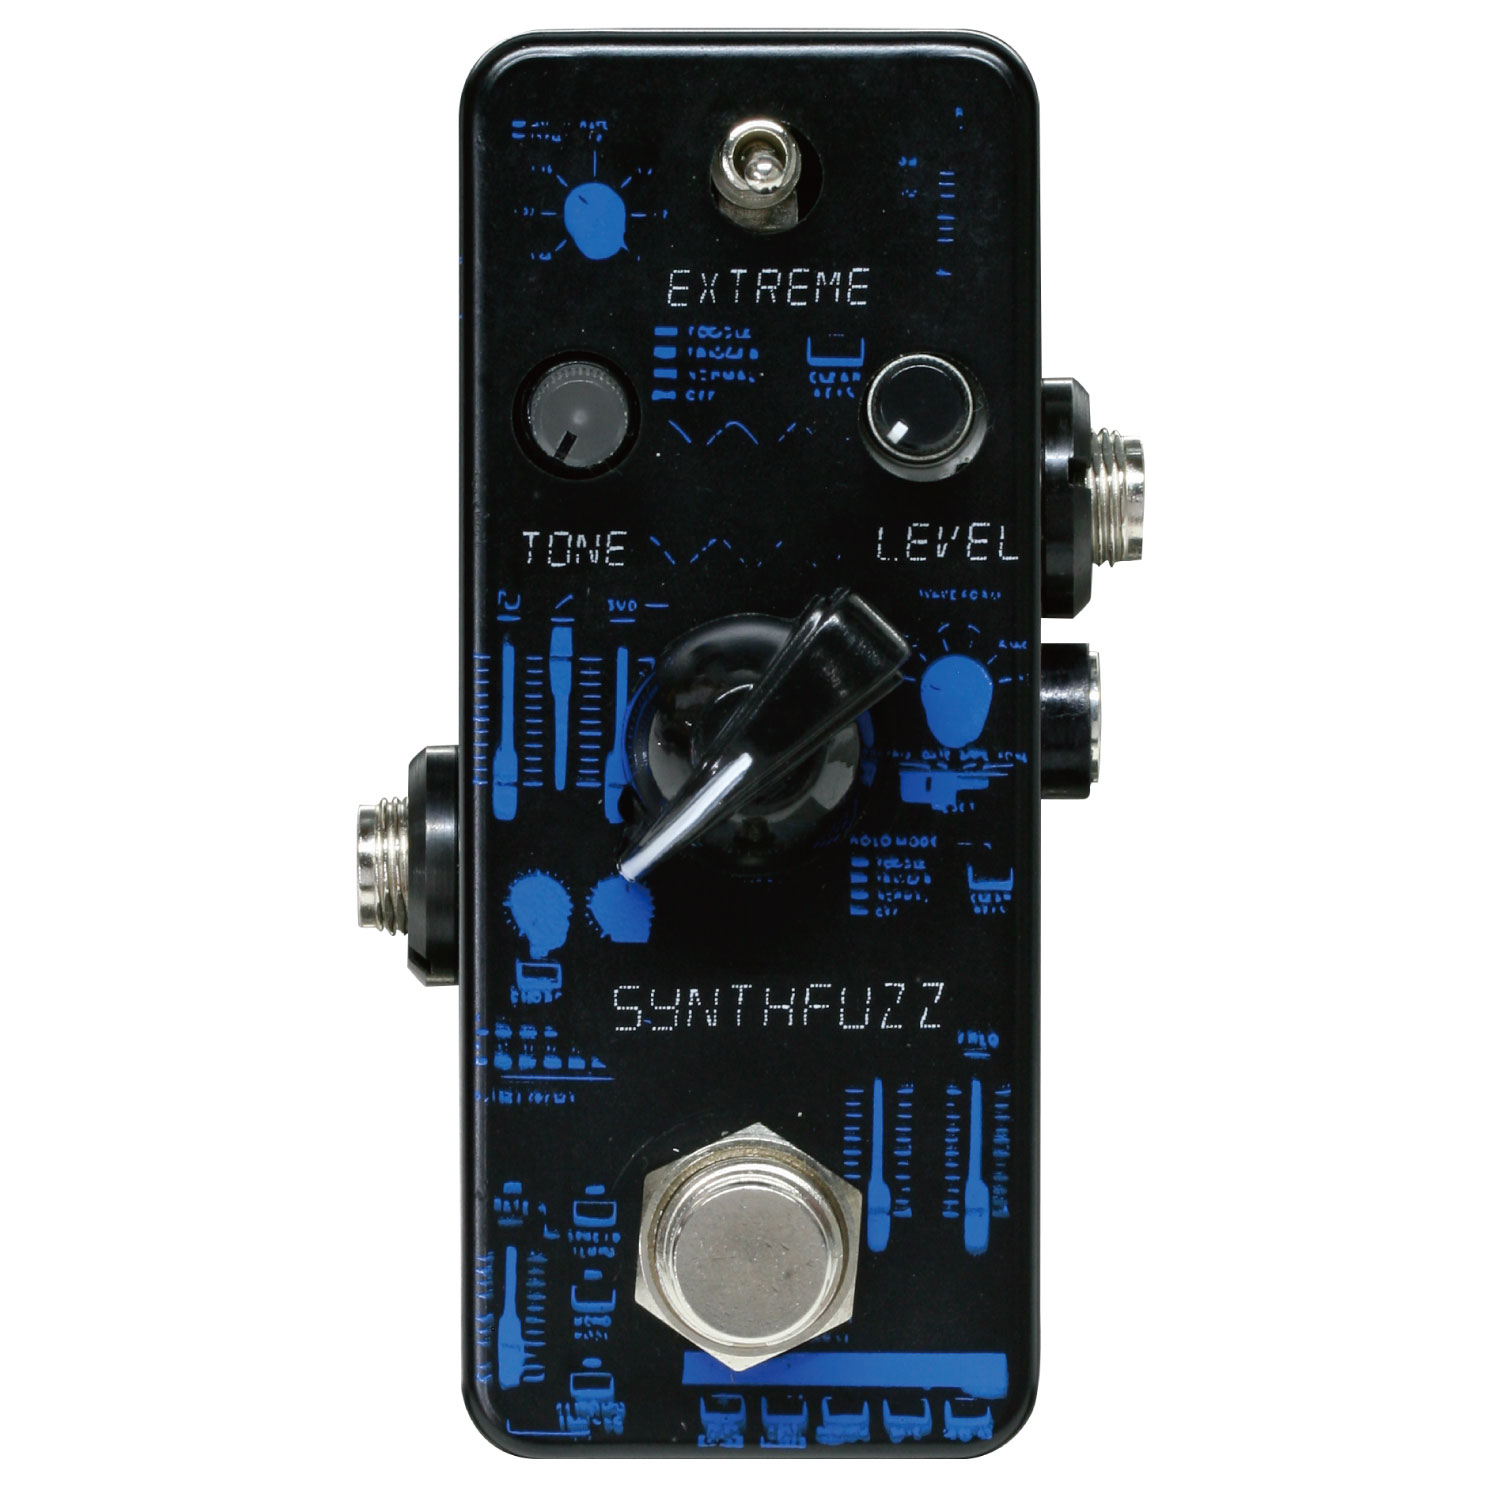 【F-PEDALS】話題のF-PEDALSより個性あふれる新機種五種が登場！